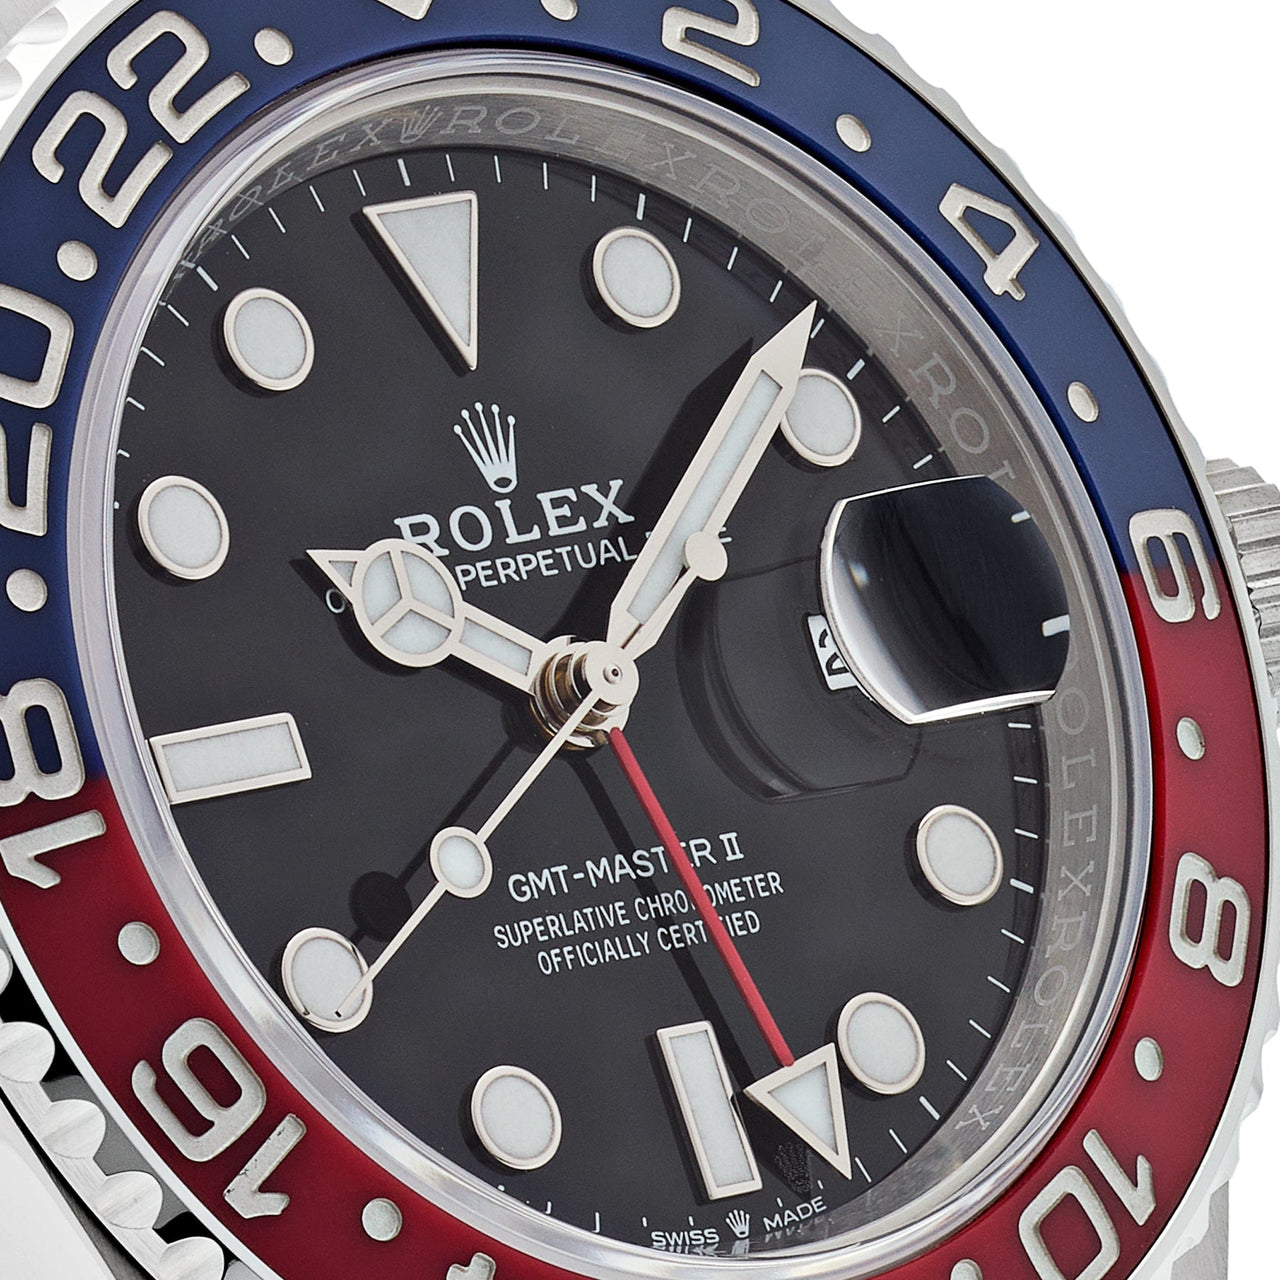 Rolex GMT-Master II Pepsi Stainless Steel Oyster 126710BLRO (2021)